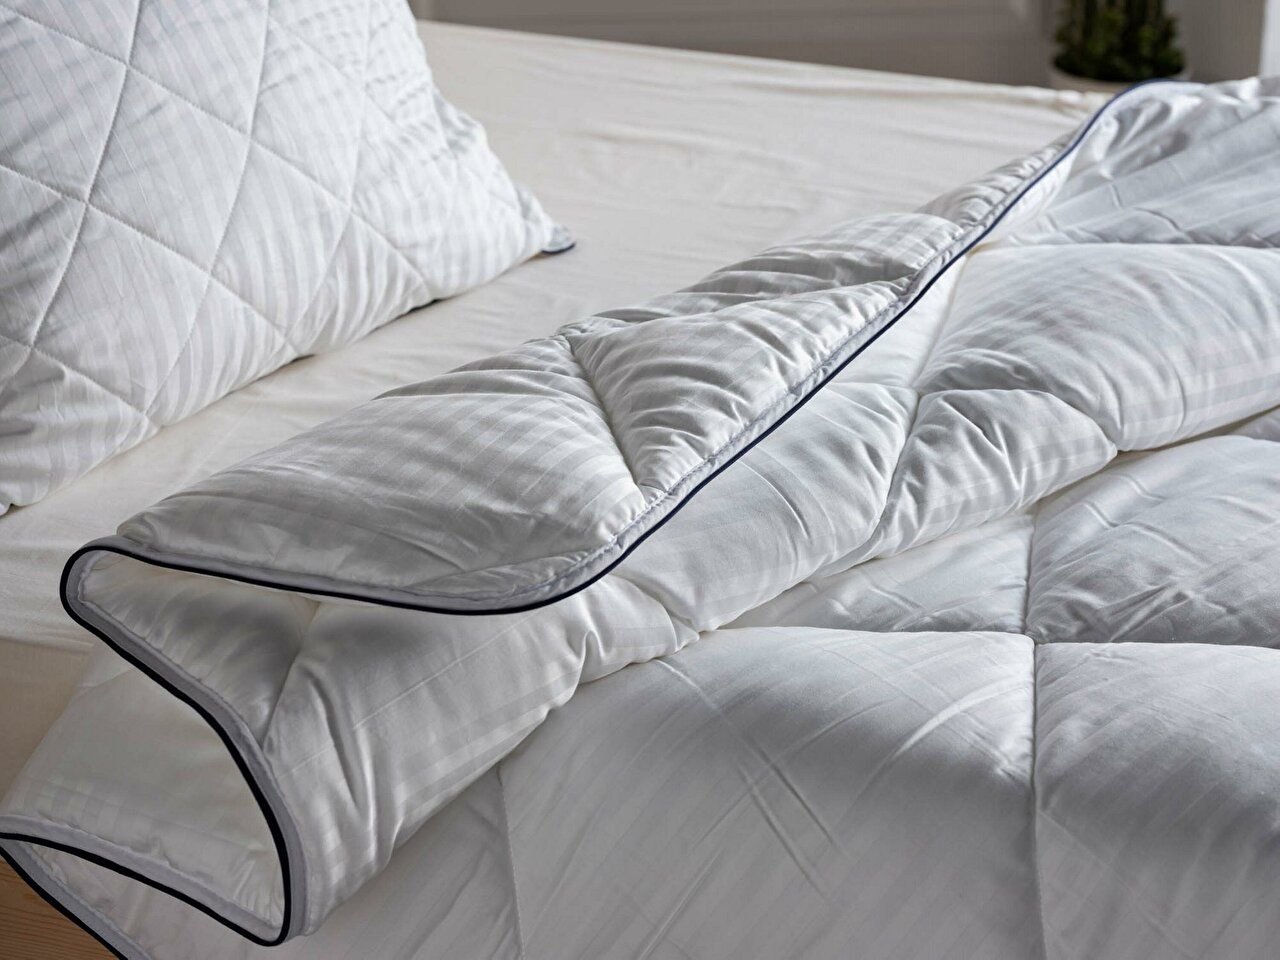  White Prestige Quilt - Luxurious Comfort for King Size Bed